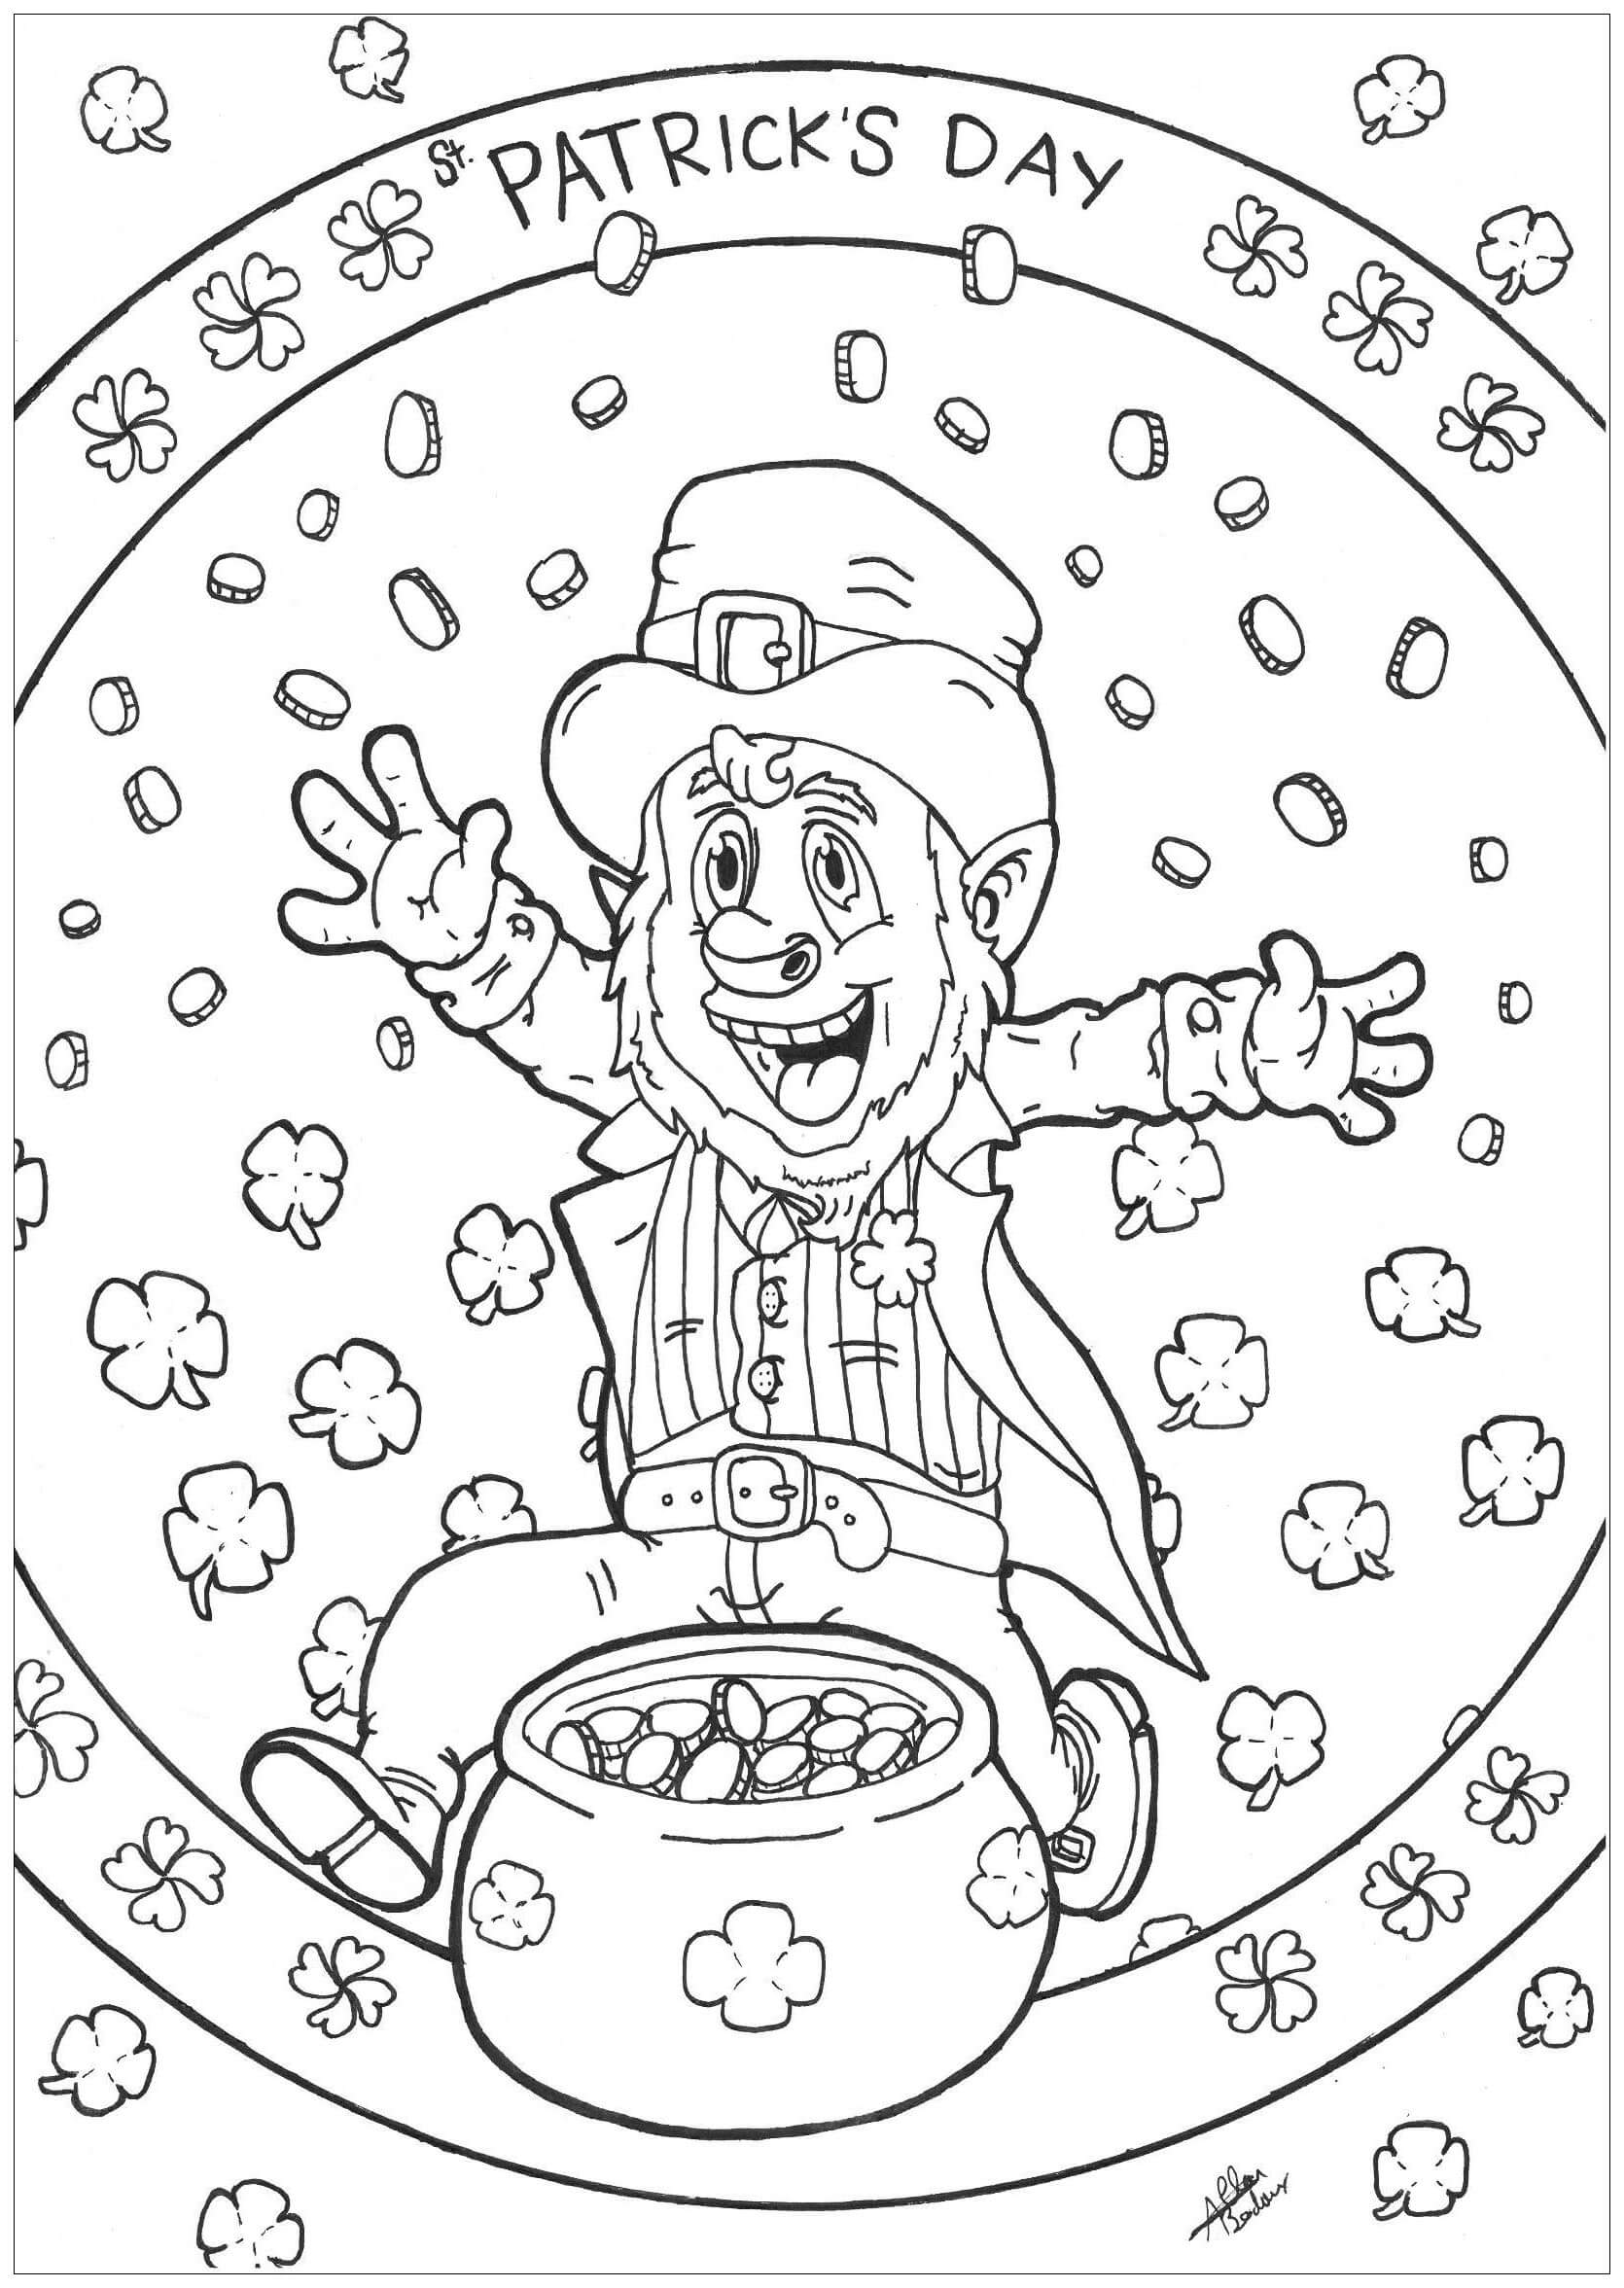 free printable st patricks day coloring pages for adults | cute st patrick's day coloring pages | snoopy st patrick's day coloring pages